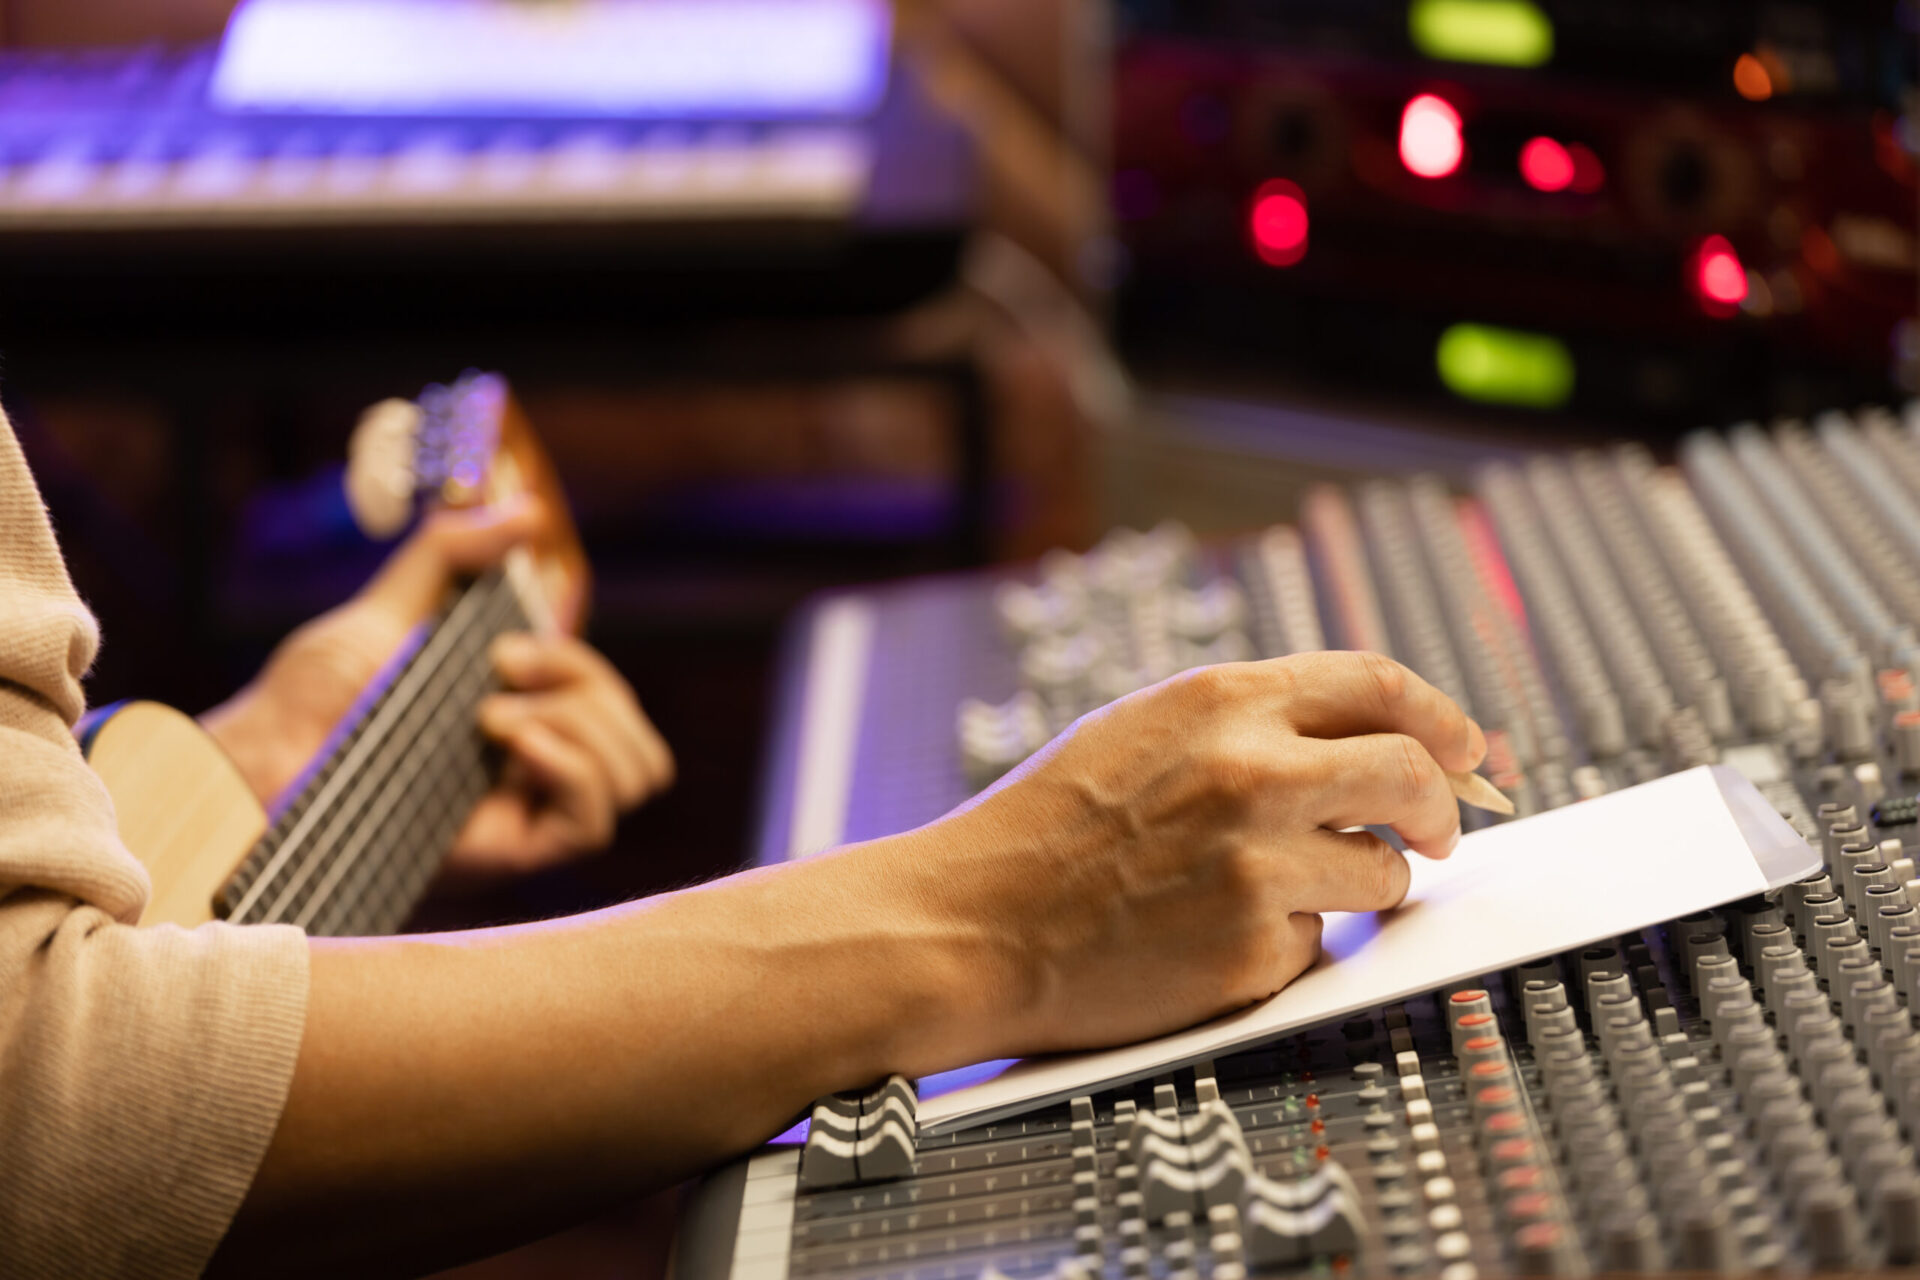 A person jotting down prices and packages in a recording studio.